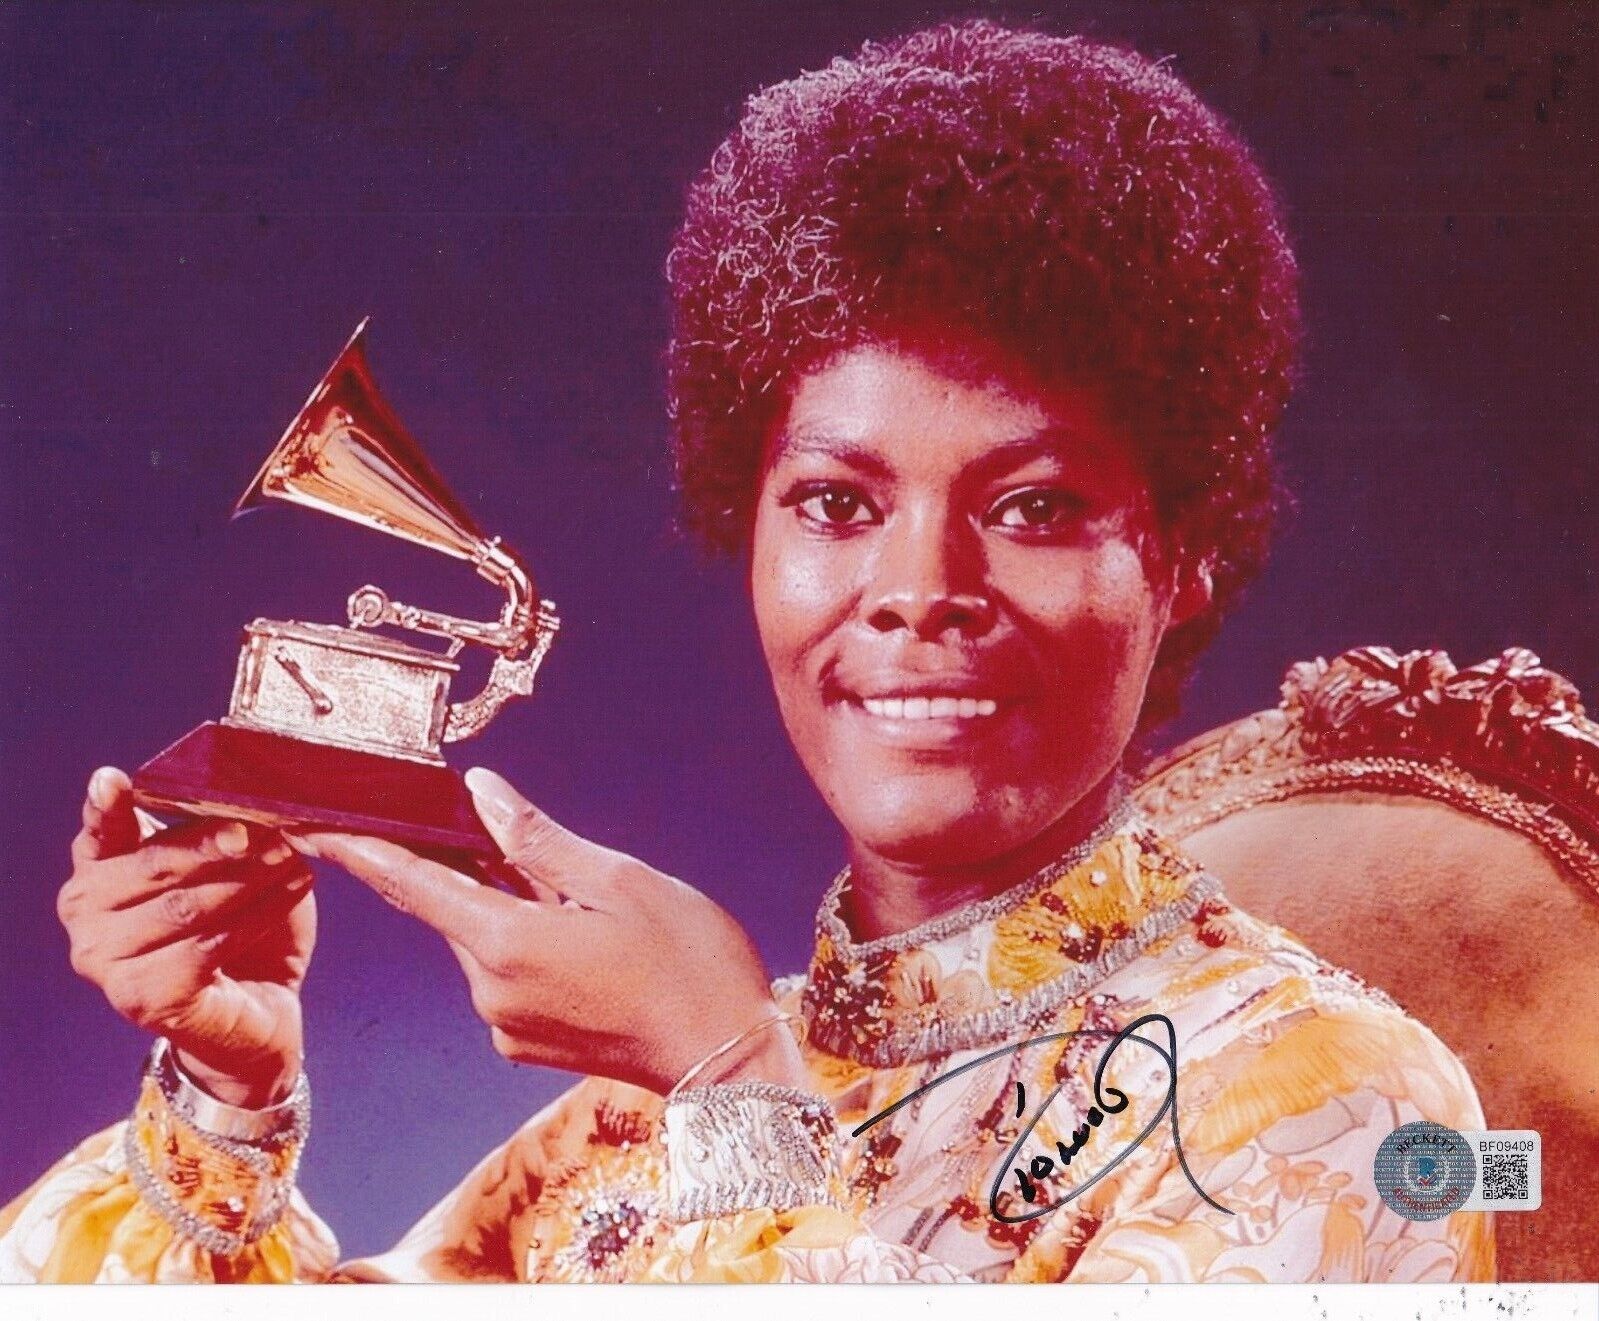 DIONNE WARWICK signed (R&B Hall of Fame) Music 8X10 photo BECKETT BAS BF09408